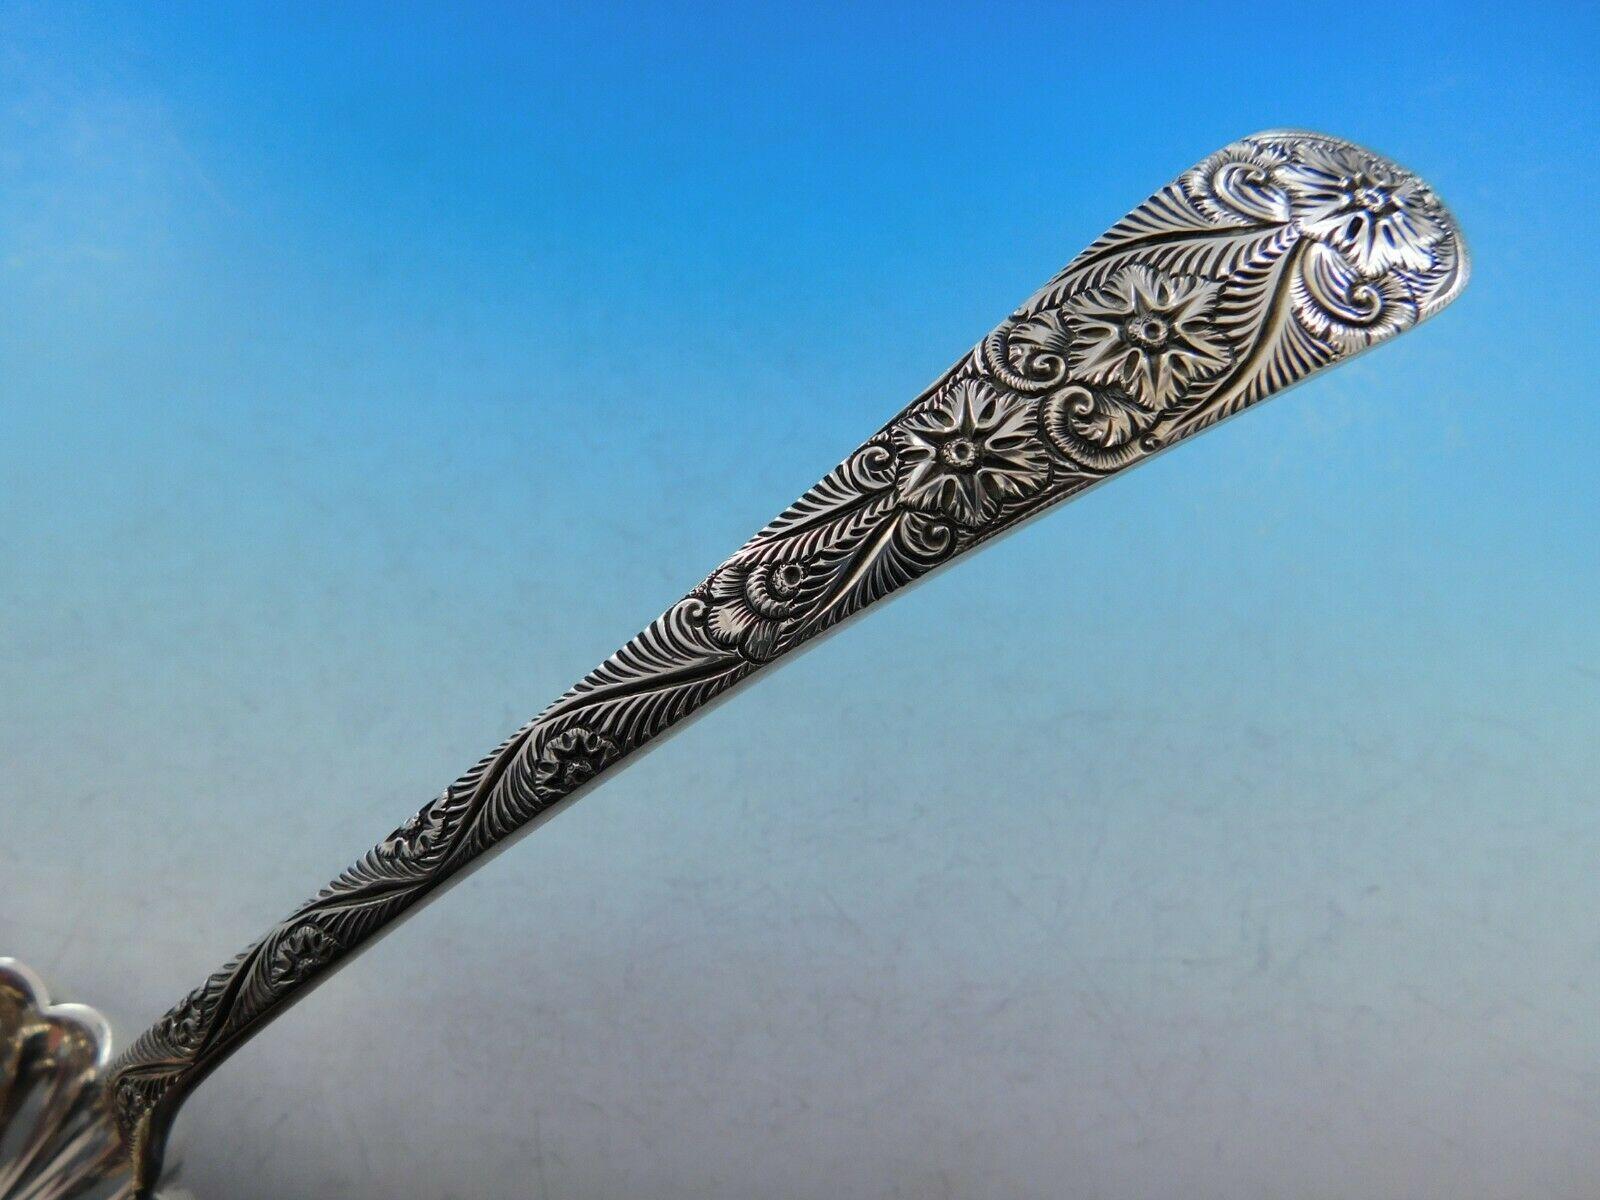 Antique engraved aka custom engraved by Tiffany & Co.

Masterfully crafted sterling silver pea spoon measuring 8 1/2